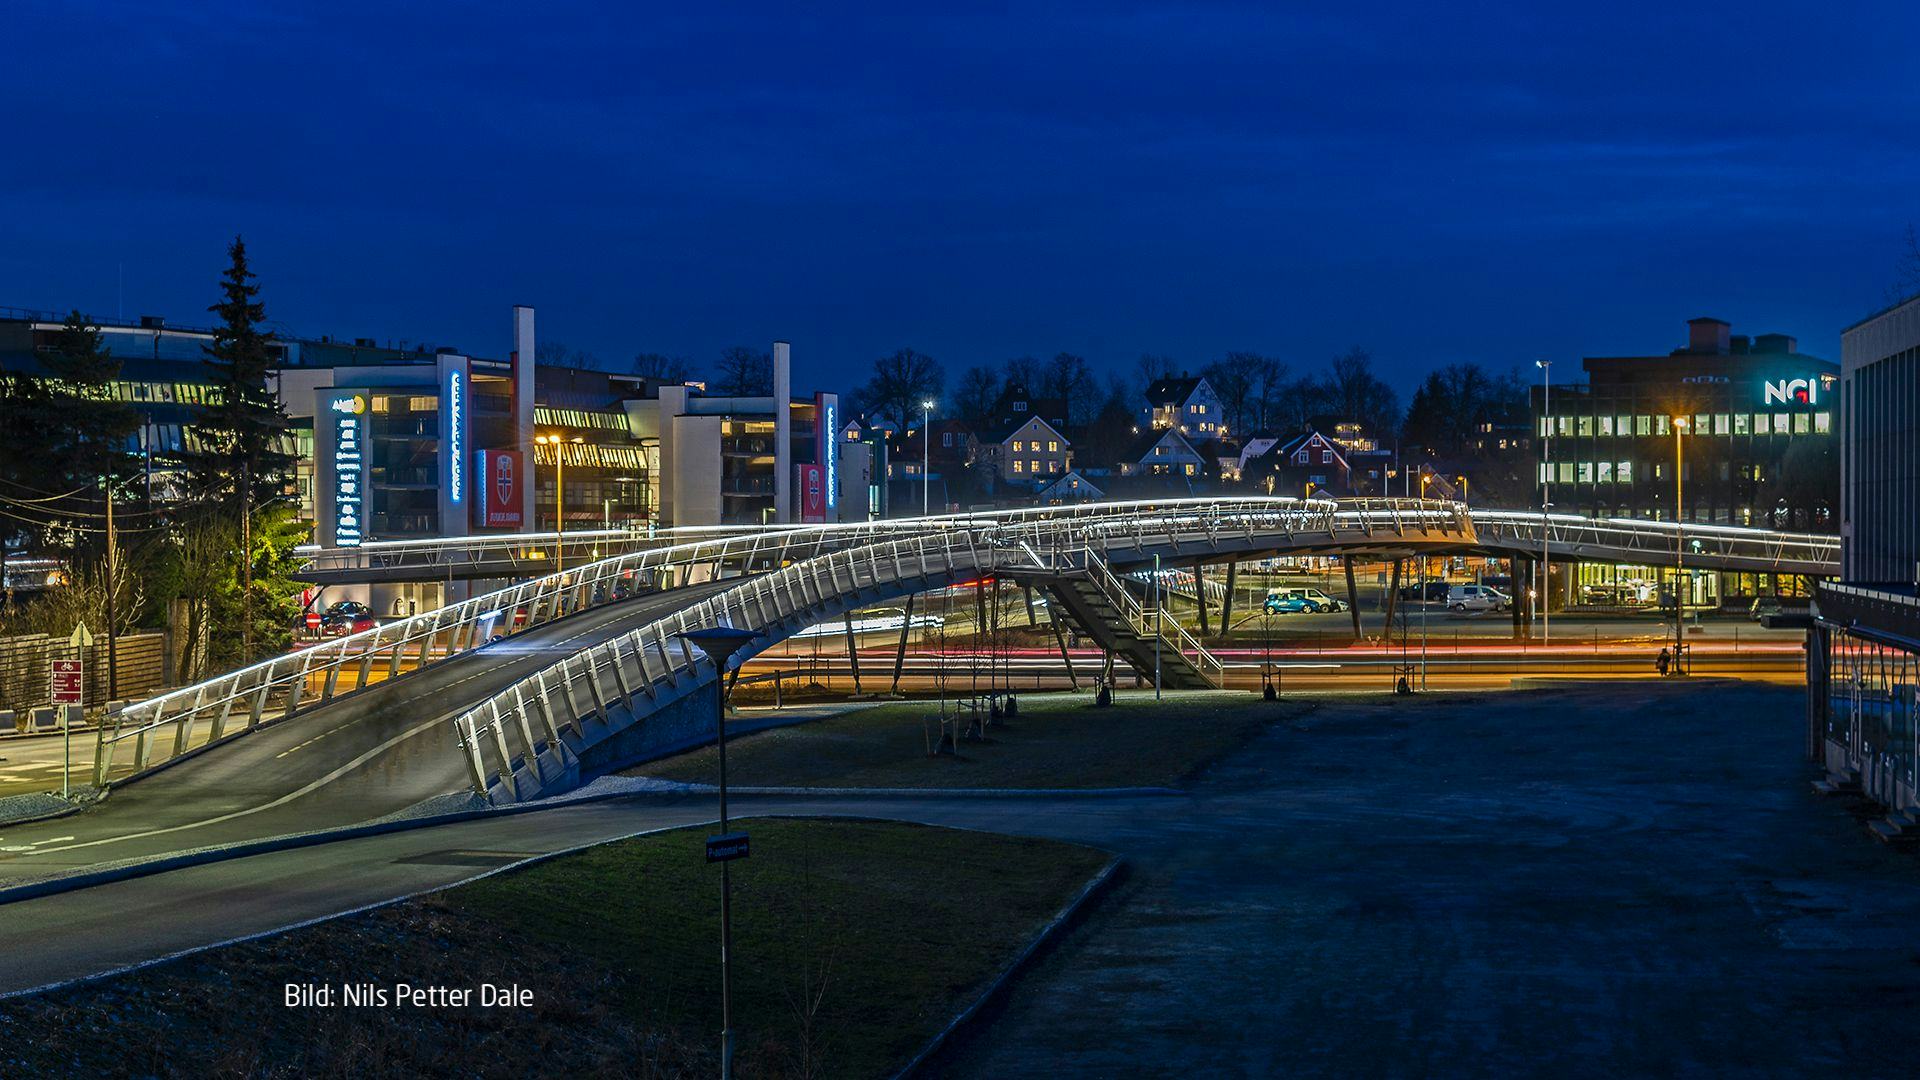 A curving pedestrian bridge at dusk with the lights of a city in the background